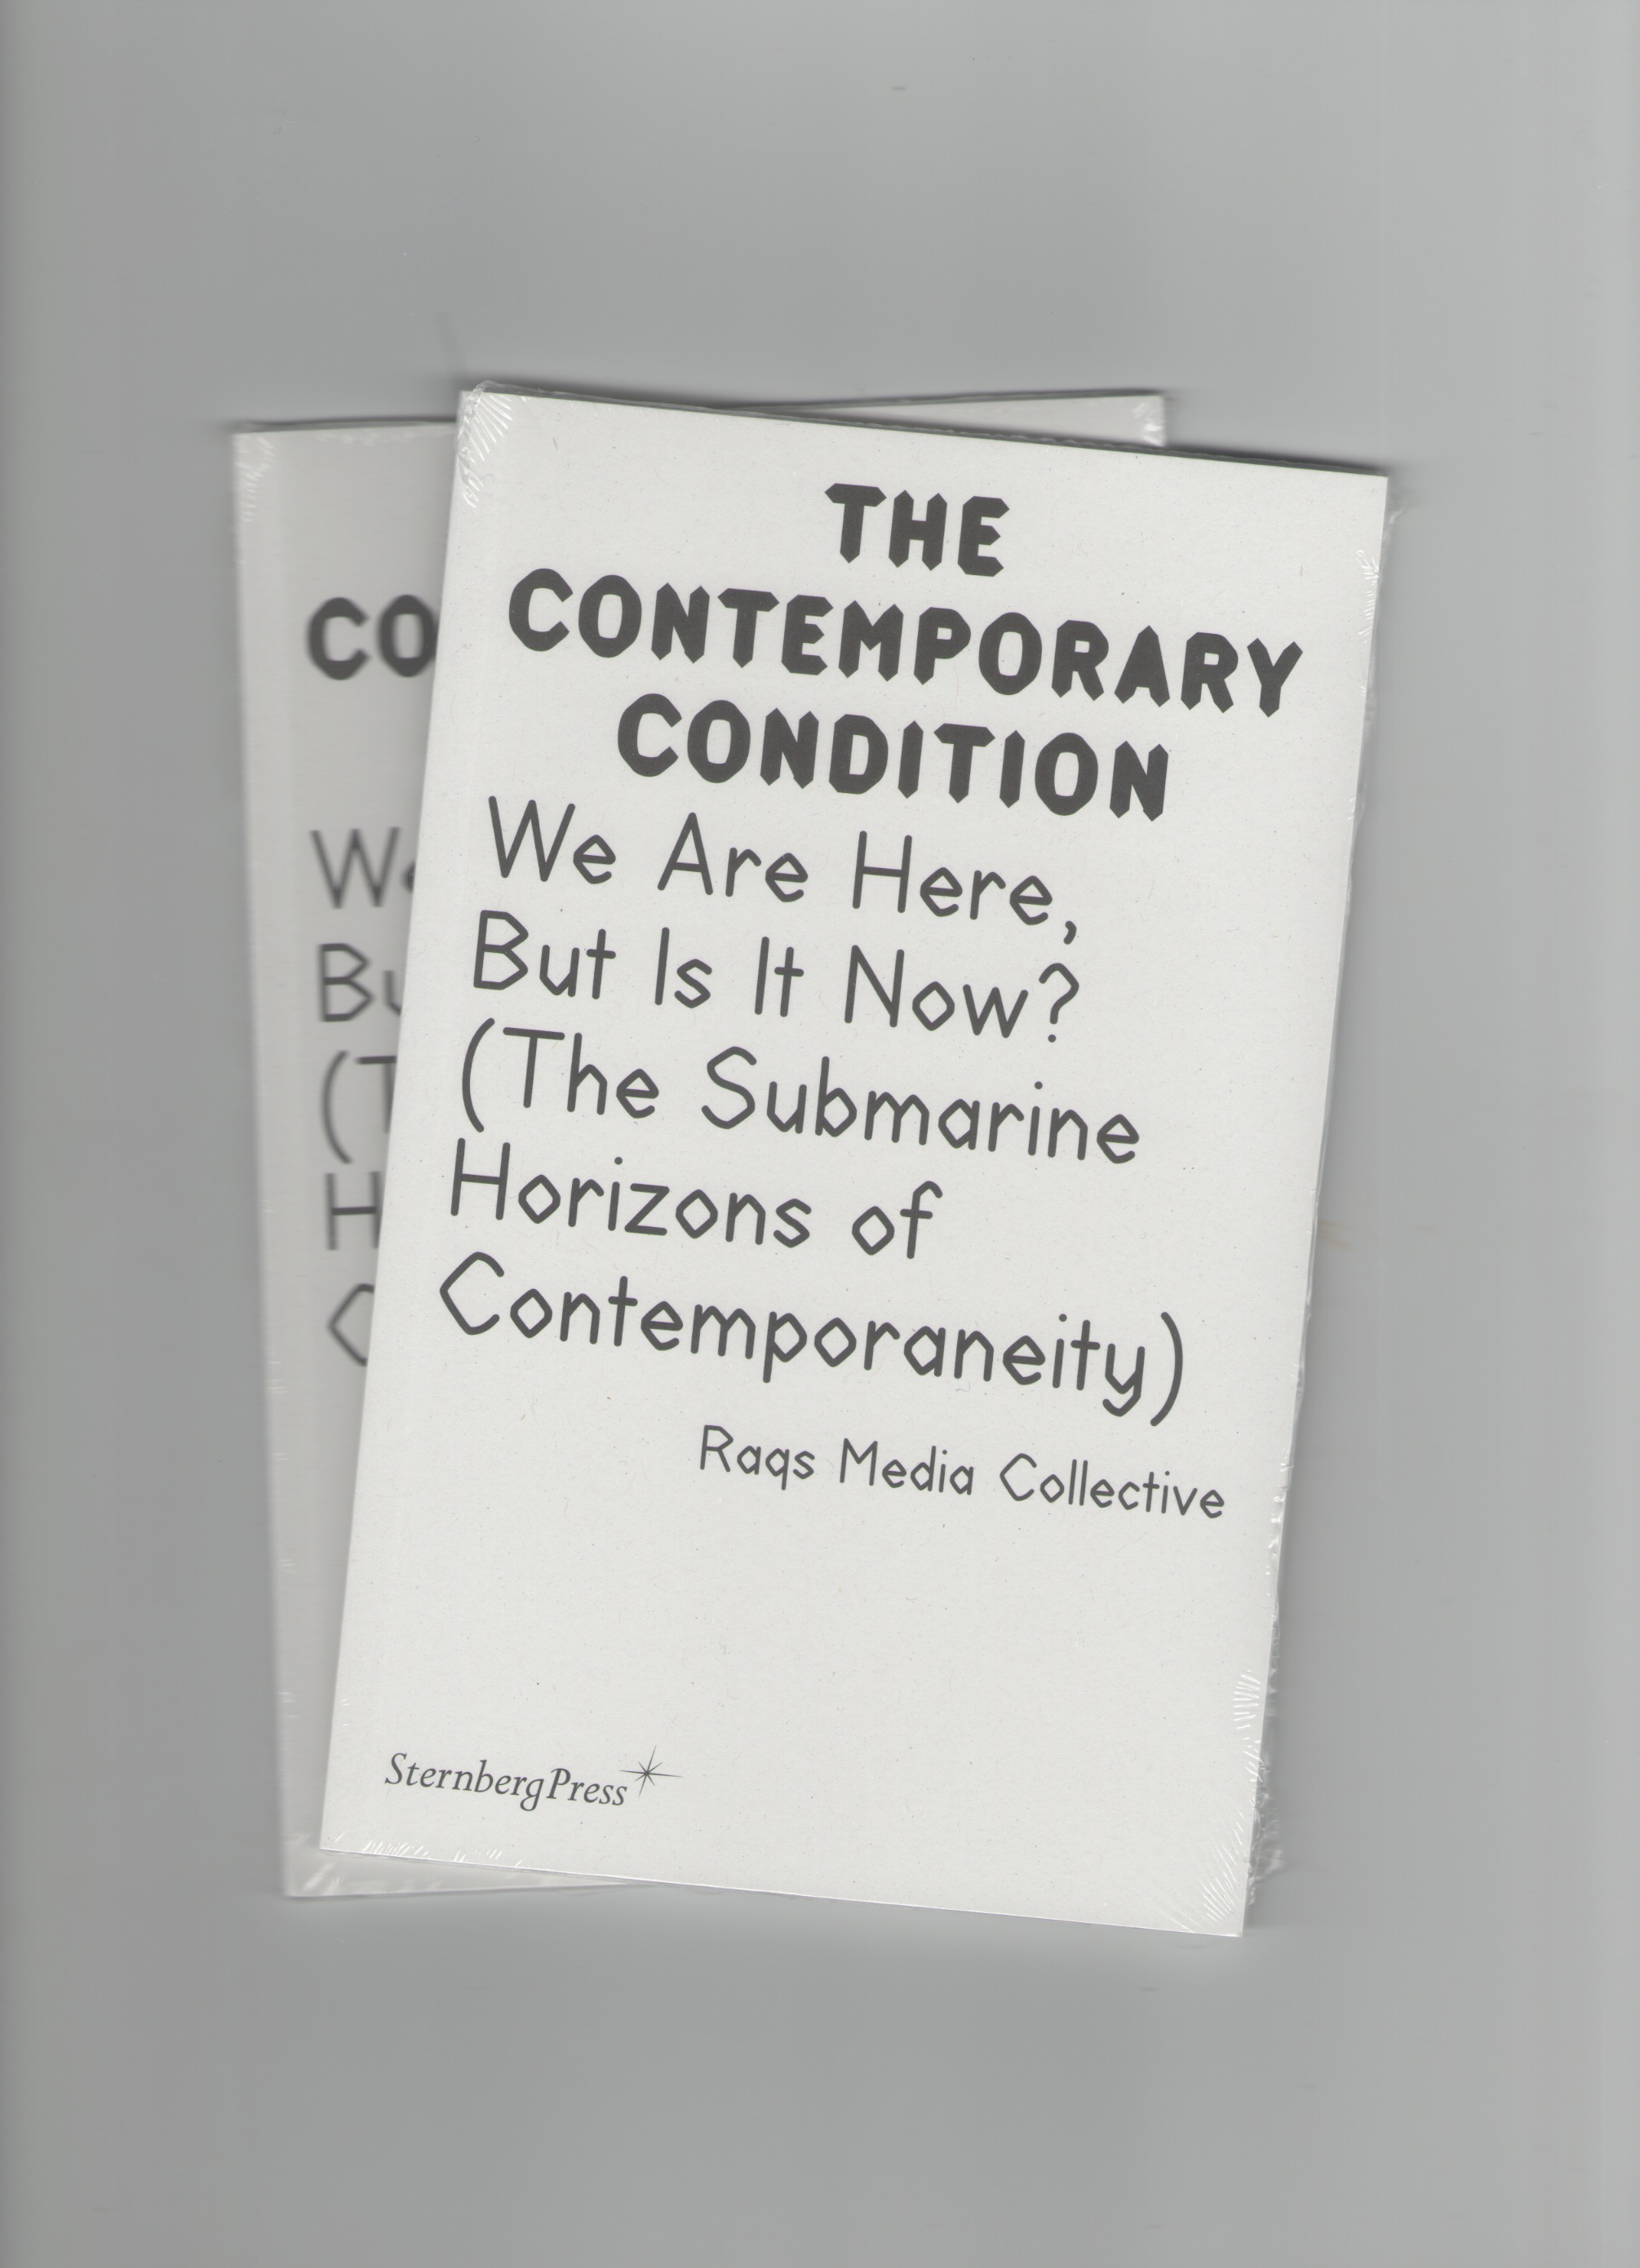 RAQS MEDIA COLLECTIVE - The Contemporary Condition. We Are Here, But Is It Now? (The Submarine Horizons of Contemporaneity)